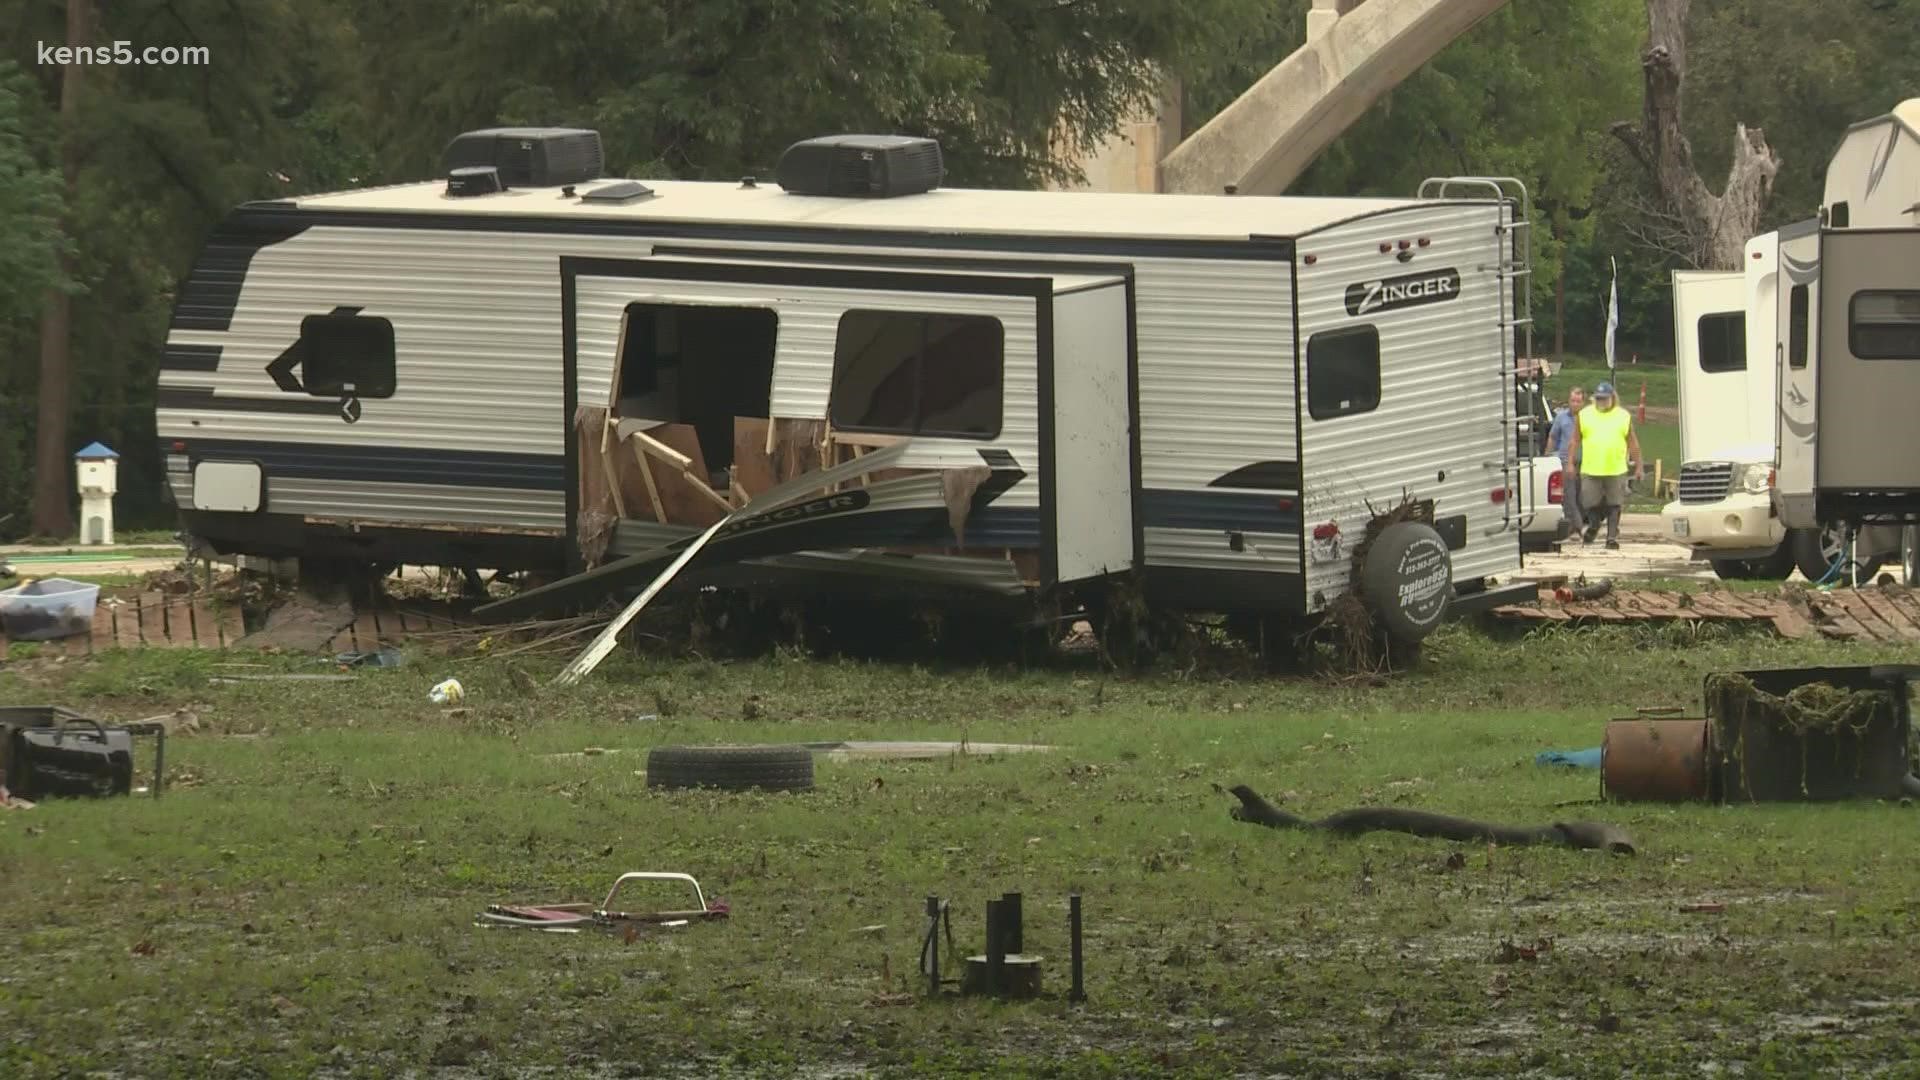 Several RV park residents spent Thursday cleaning up the damage and being thankful it wasn't worse.